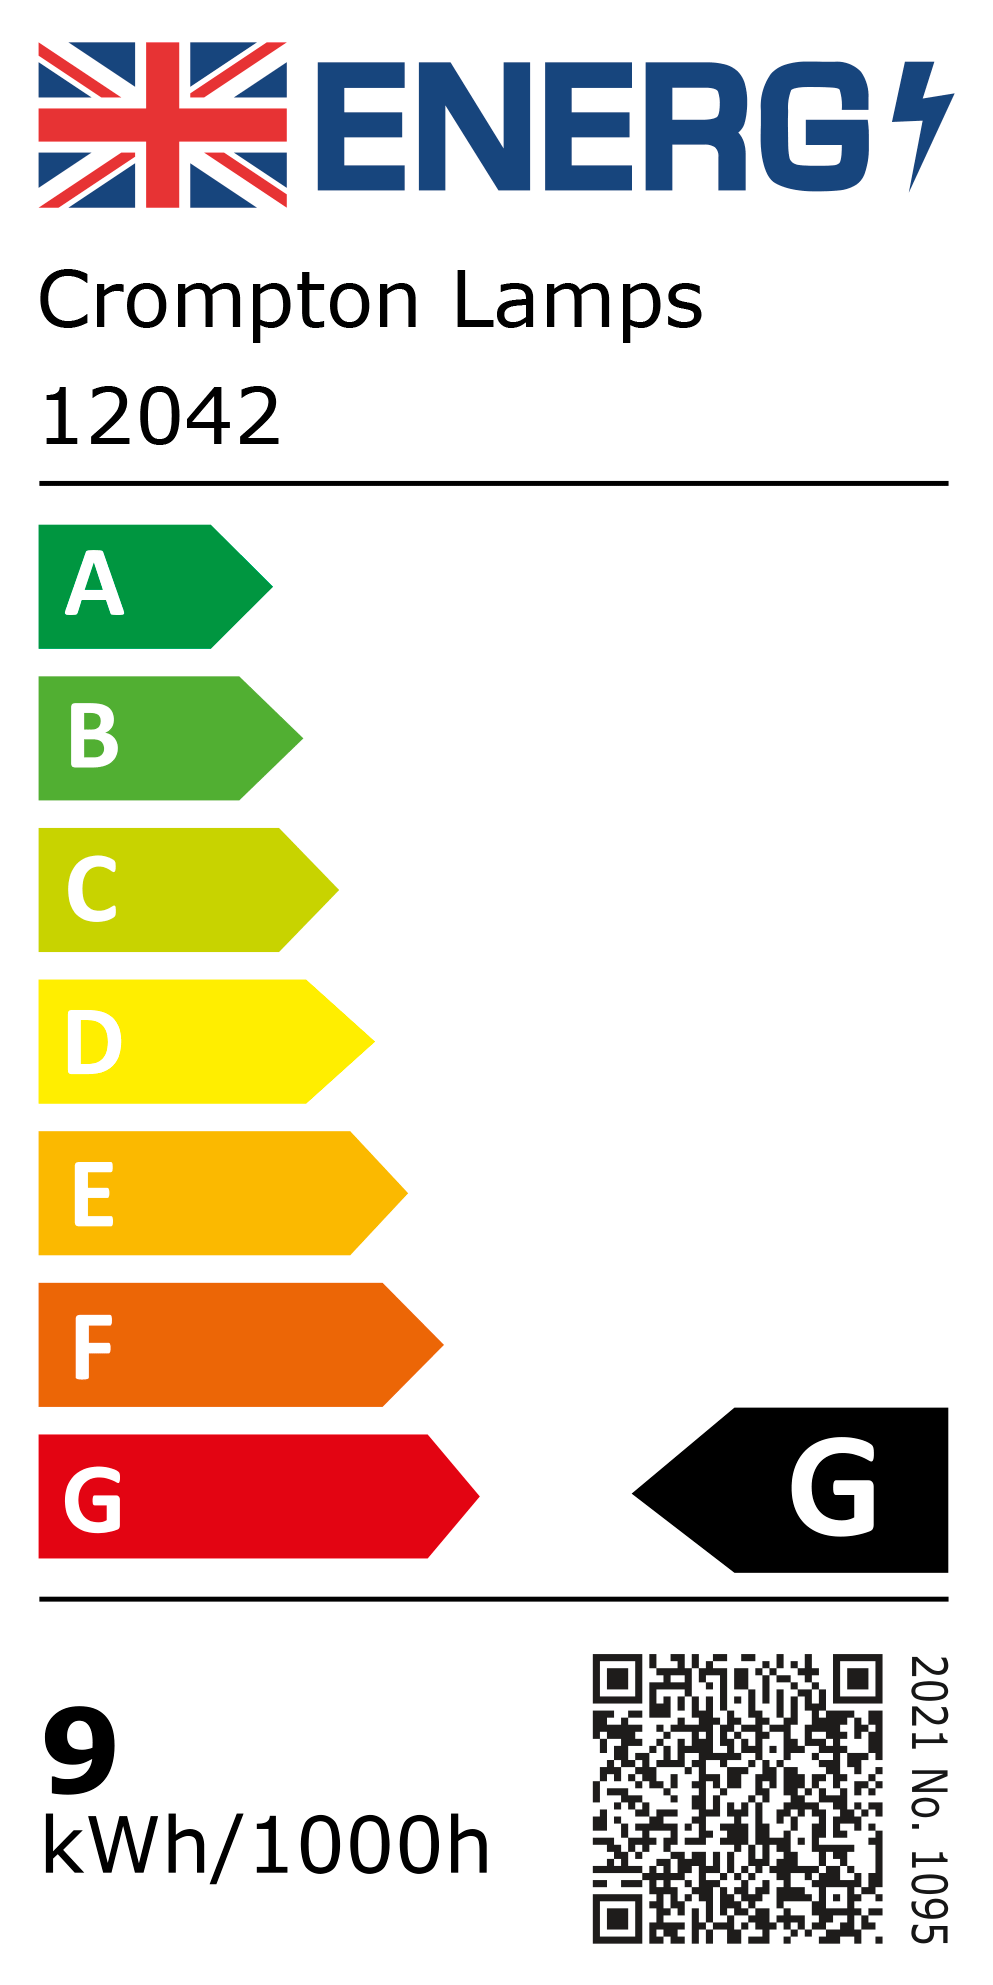 New 2021 Energy Rating Label: Stock Code 12042